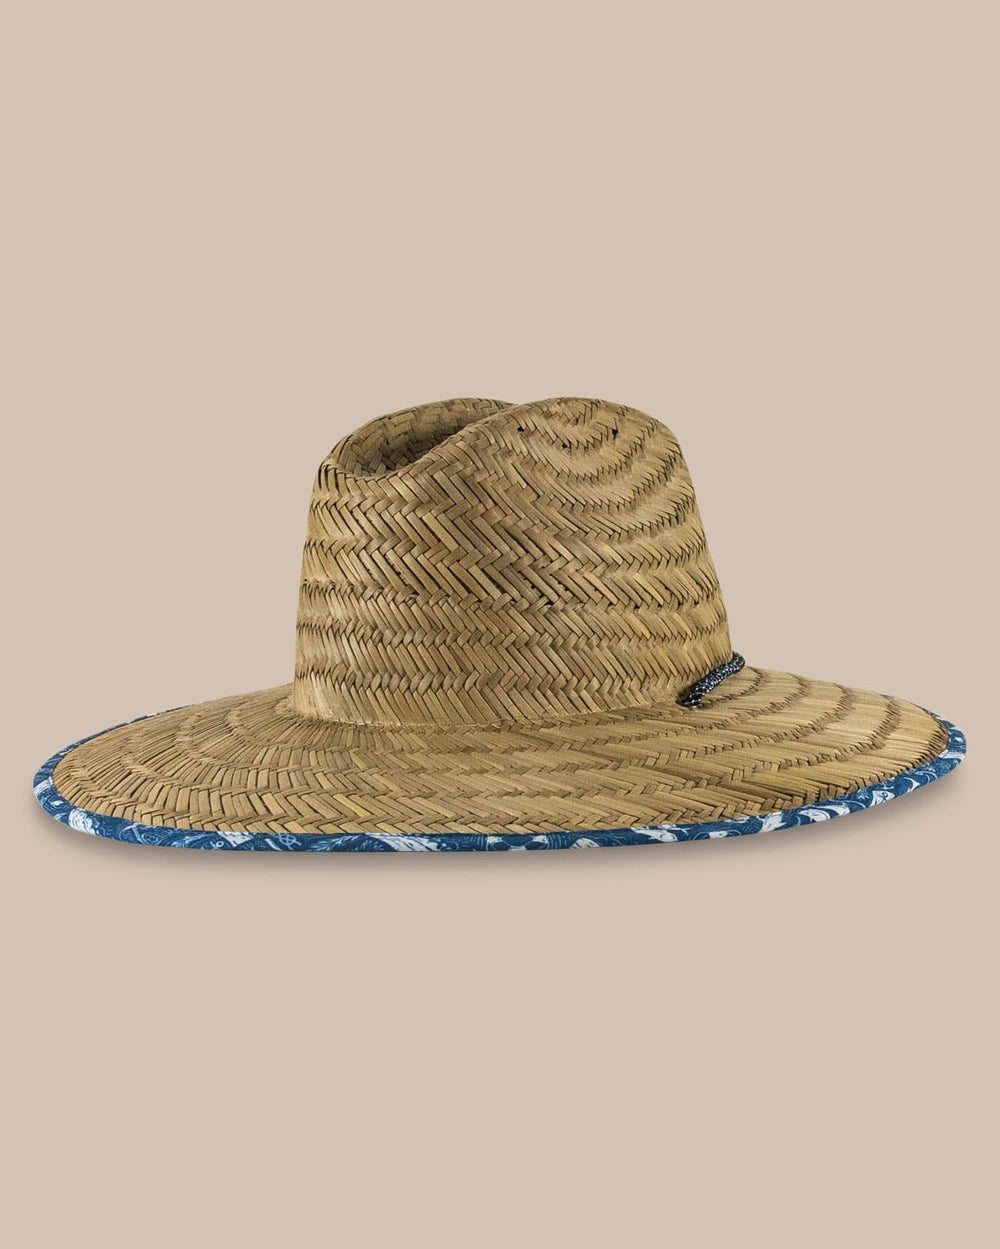 The back view of the Southern Tide All Inclusive Straw Hat by Southern Tide - Aged Denim